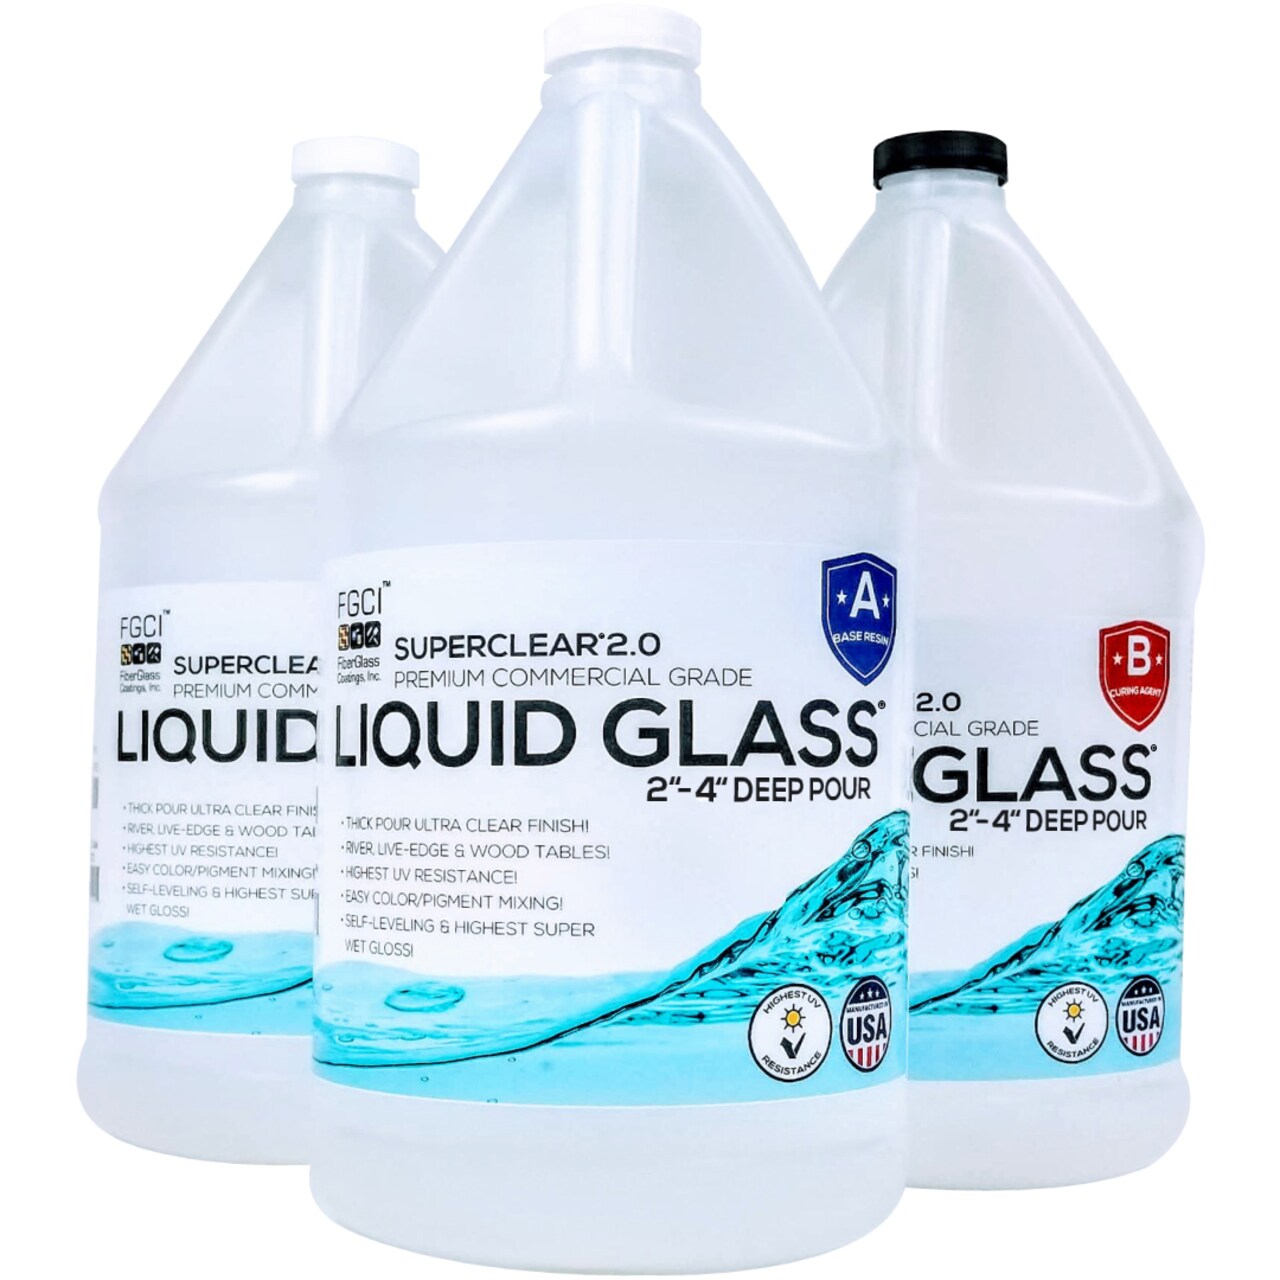 Superclear Liquid Glass Deep Pour Epoxy Resin - 2-4 Thick Deep Pour Epoxy  Great for River Tables, Large Castings and much more!